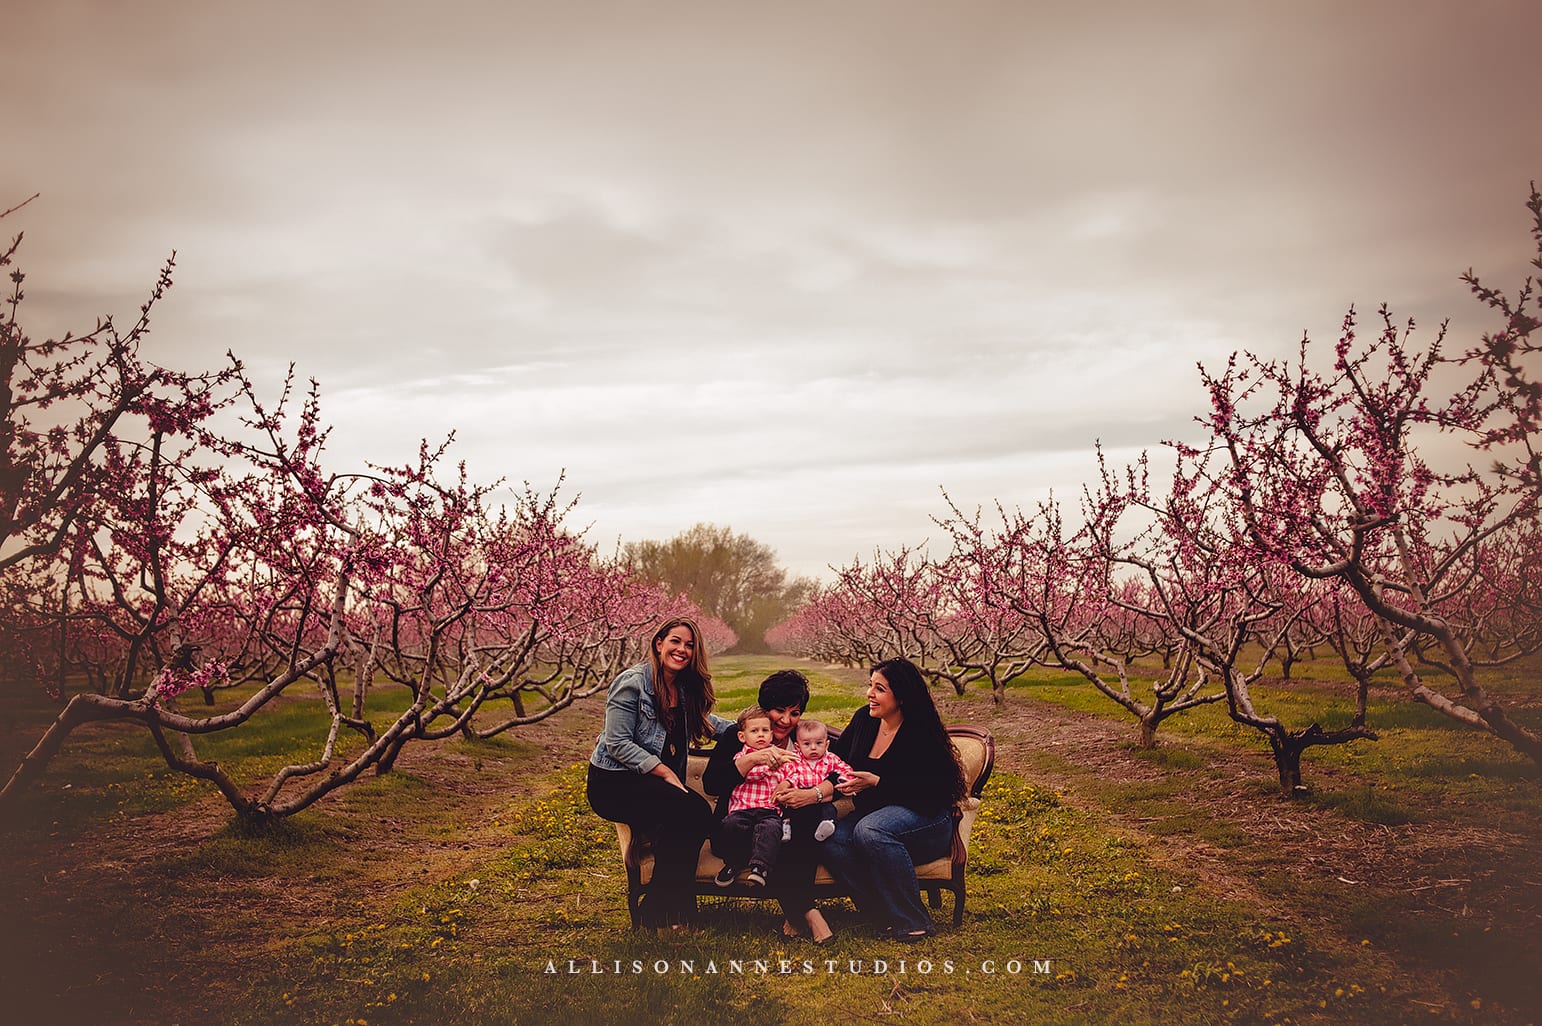 Pastore Orchard, Mommy & Me Mini Sessions, Peach blossoms, generations, Elm New Jersey, Springtime, Hammonton, AllisonAnne Studios, Best family photography